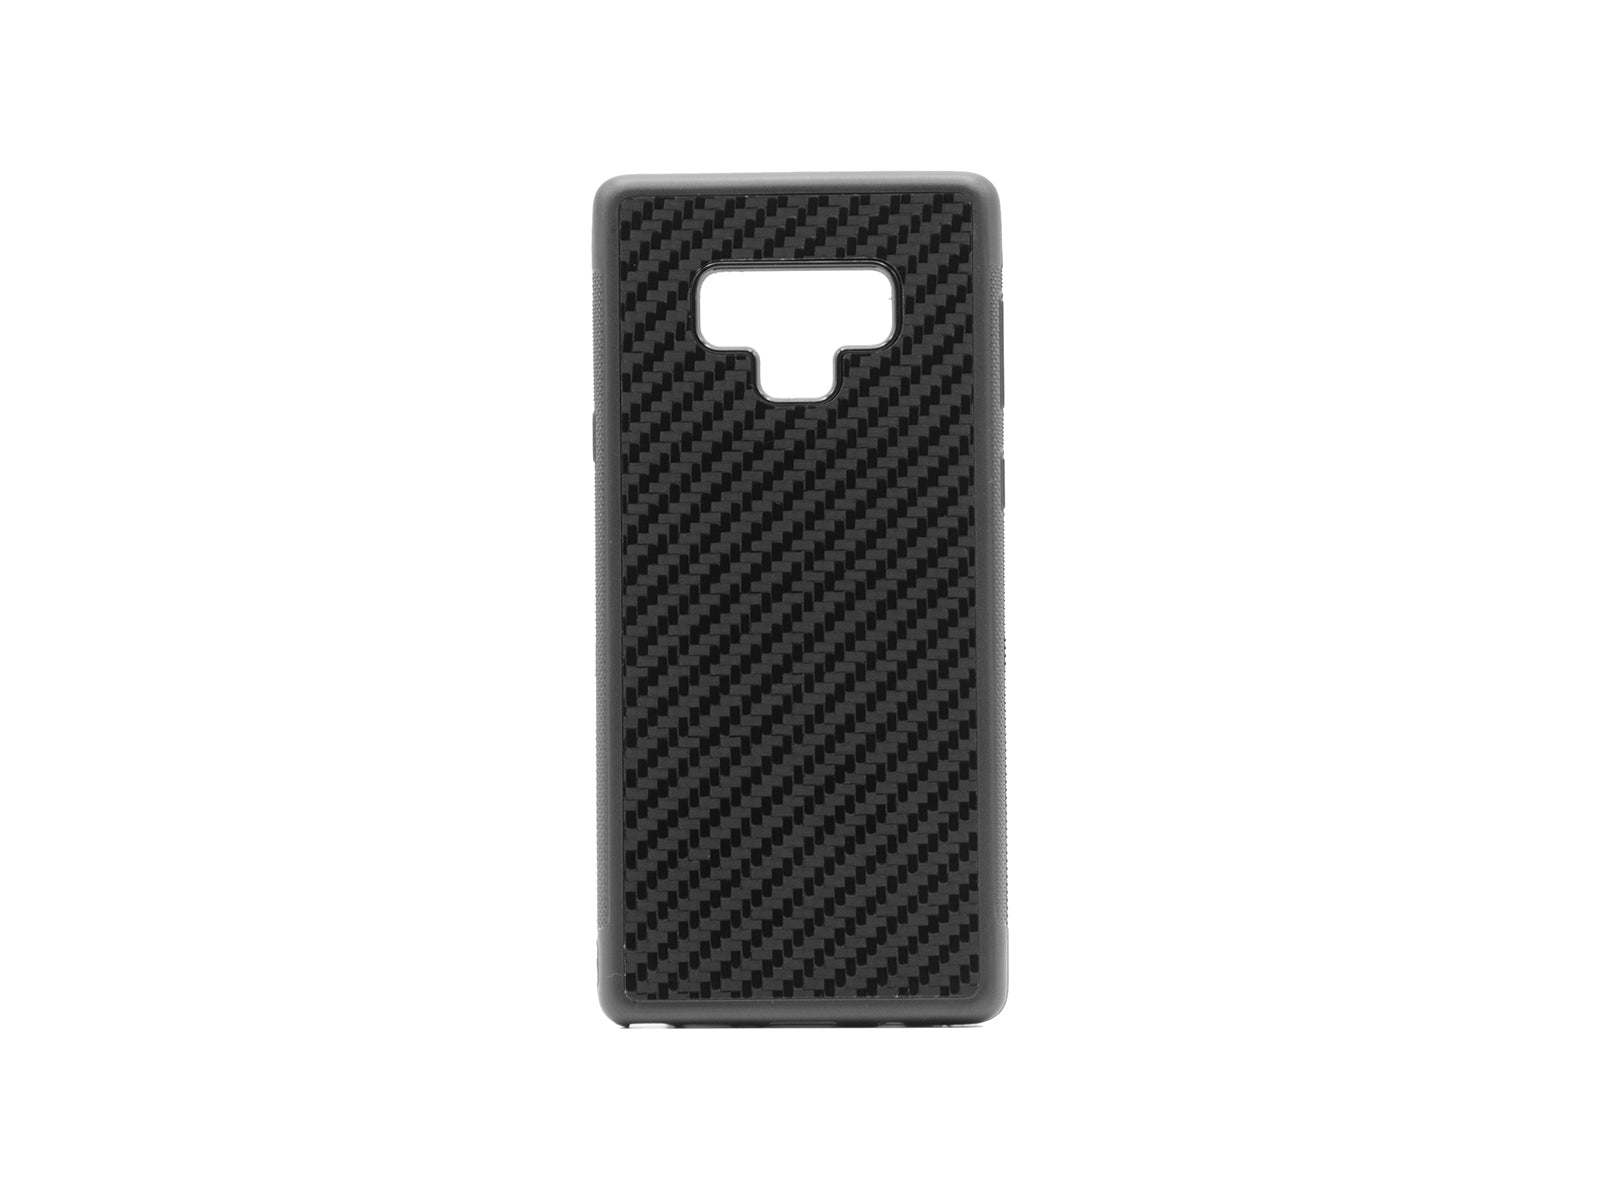 BlackStuff Genuine Carbon Fiber and Silicone Lightweight Phone Case Compatible with Samsung Galaxy S9 Plus BS-2011